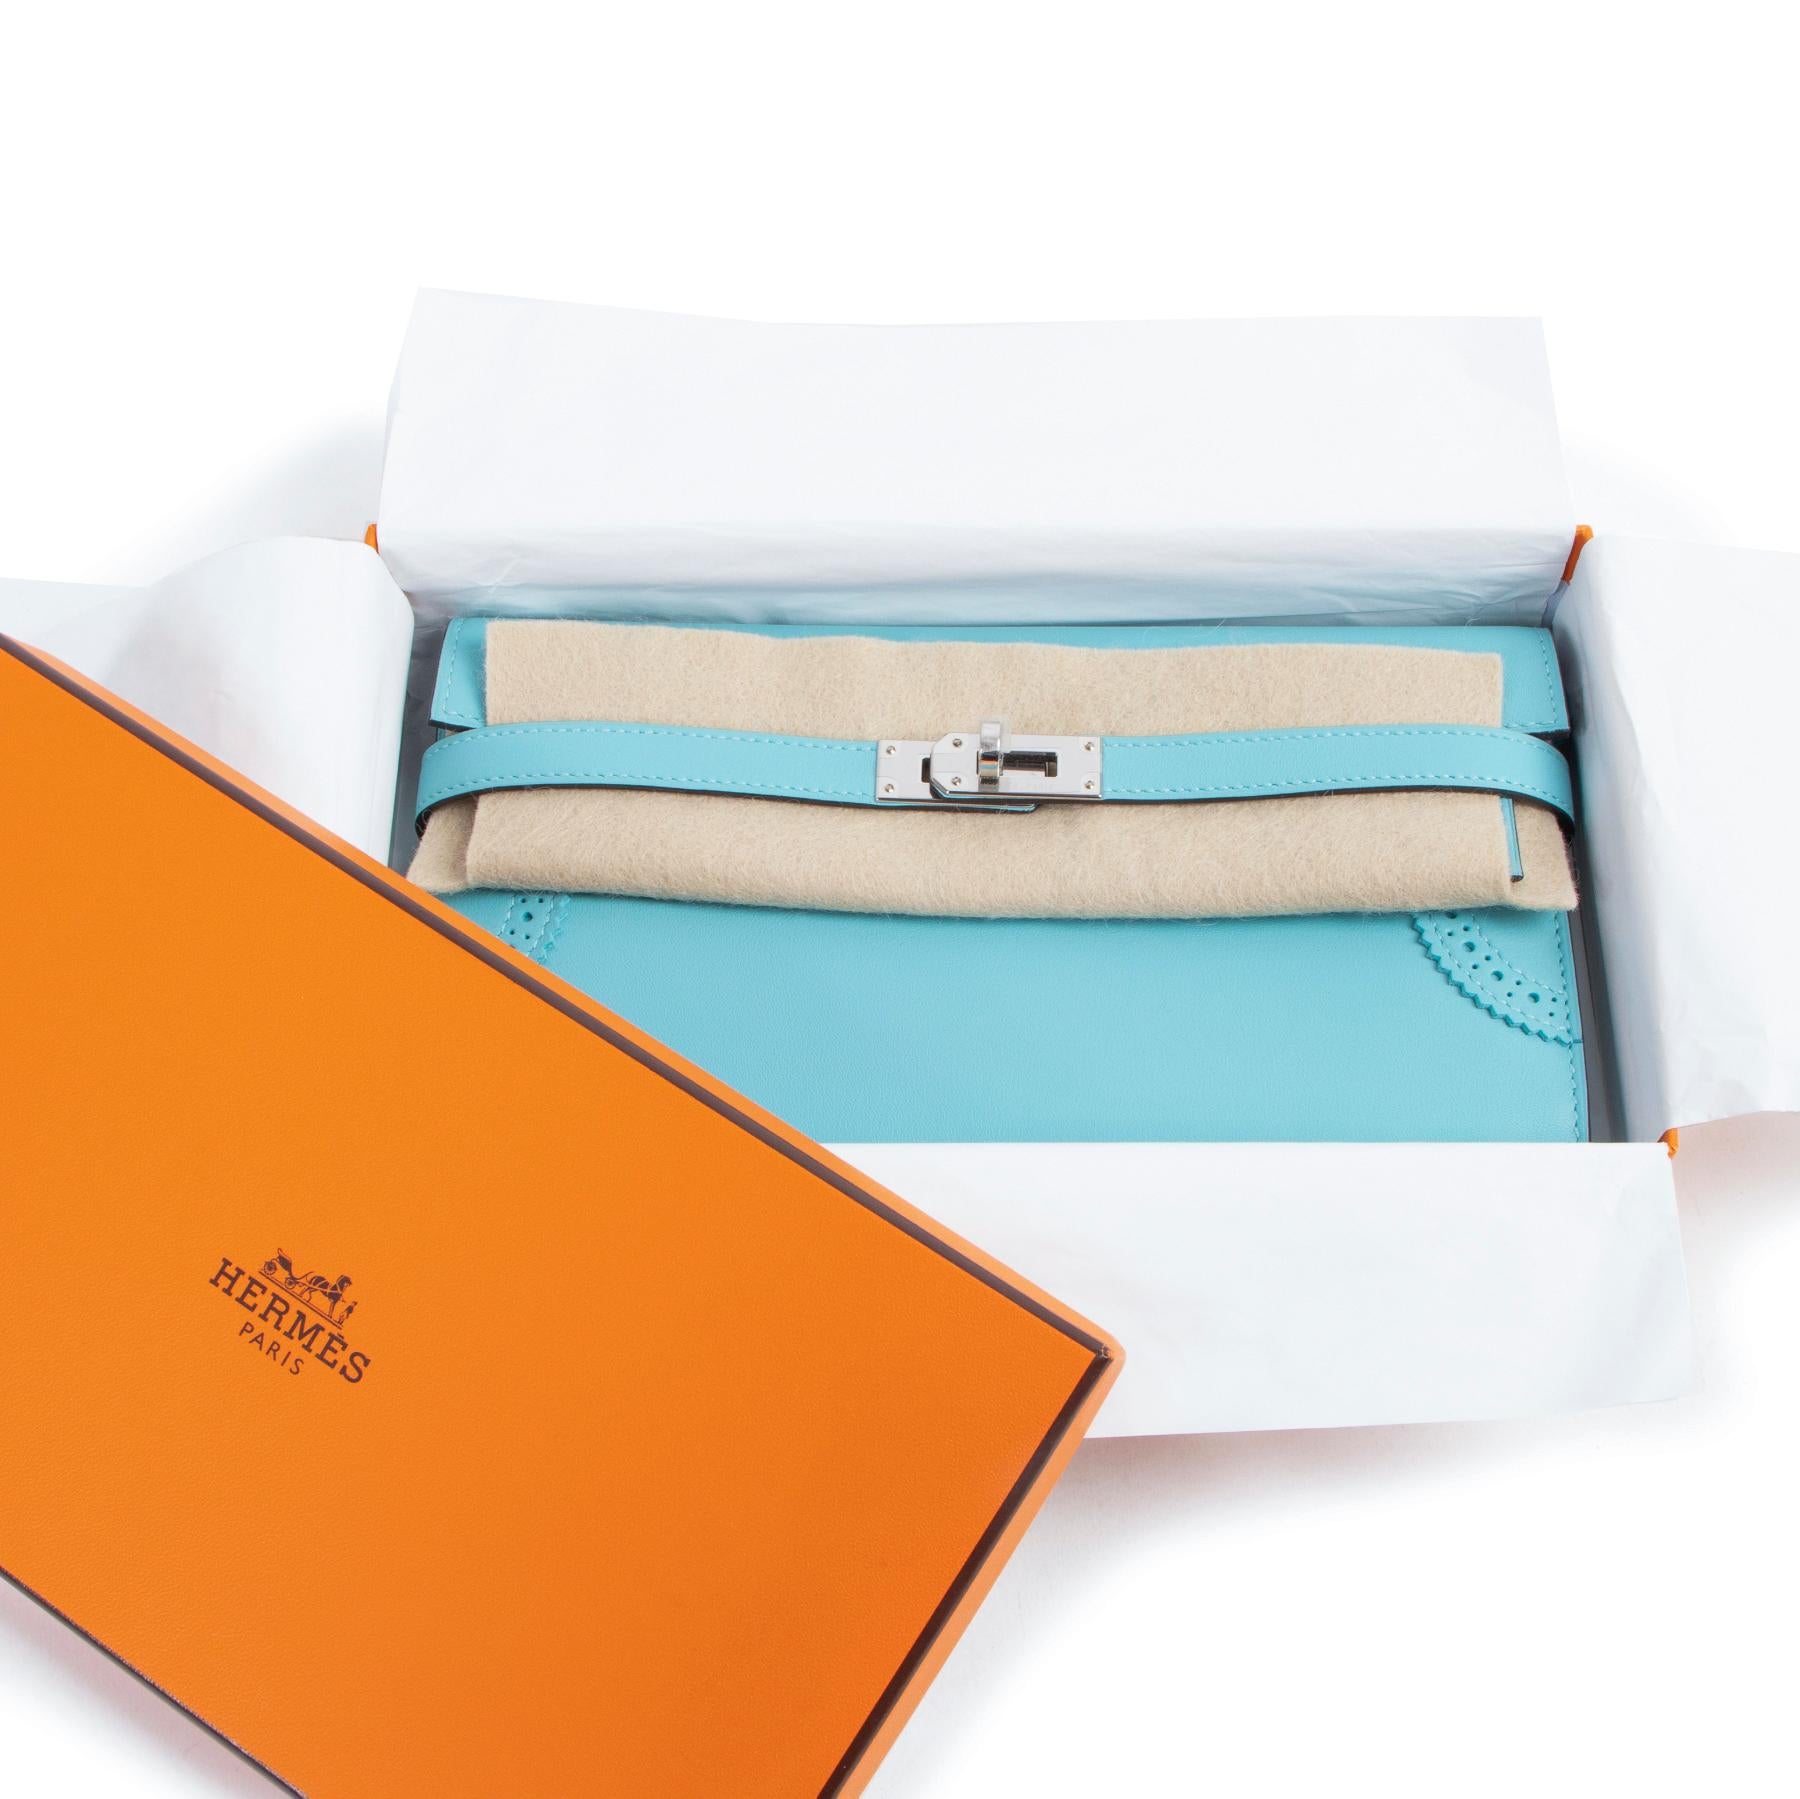 Hermès Kelly Classic Ghillies Wallet Veau Swift Blue Atole PHW

Hermès Kelly Ghillies portefeuille with beautiful broguing detail on the front. The wallet is made in charming Blue Atole. A bright and playful color that is enhanced by the smooth